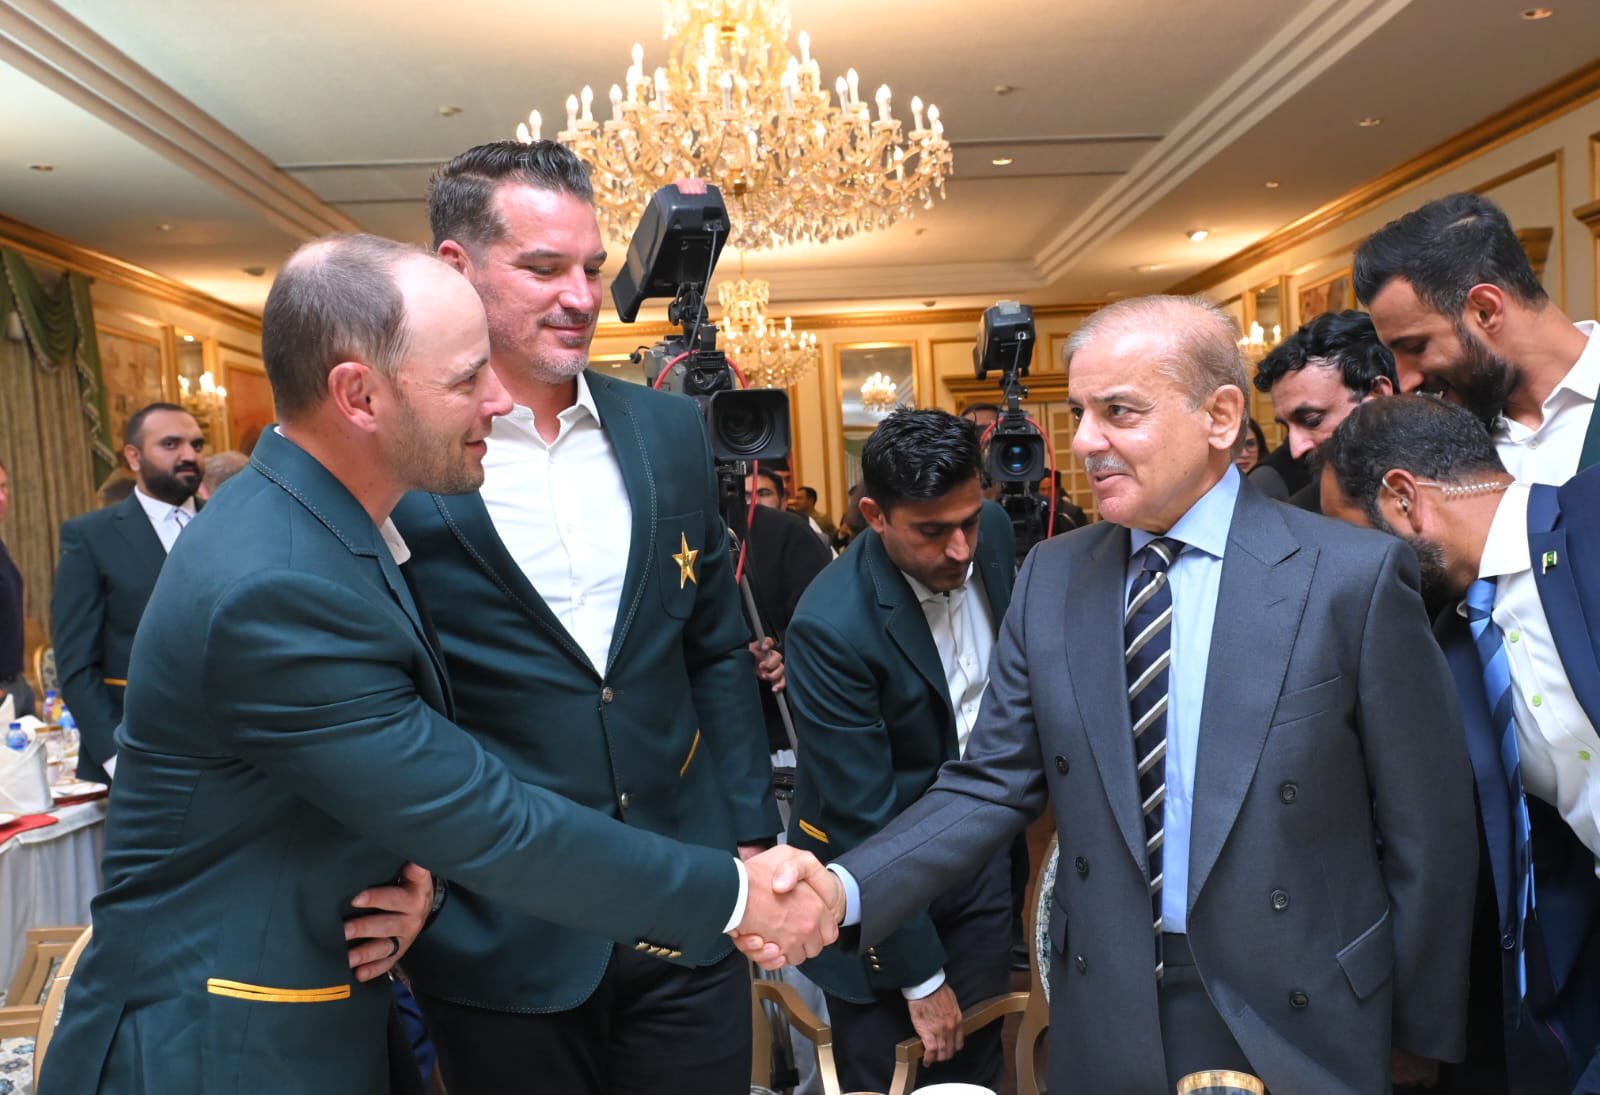 Prime Minister Shehbaz Sharif hosted a reception for Pakistan and England Cricket team.